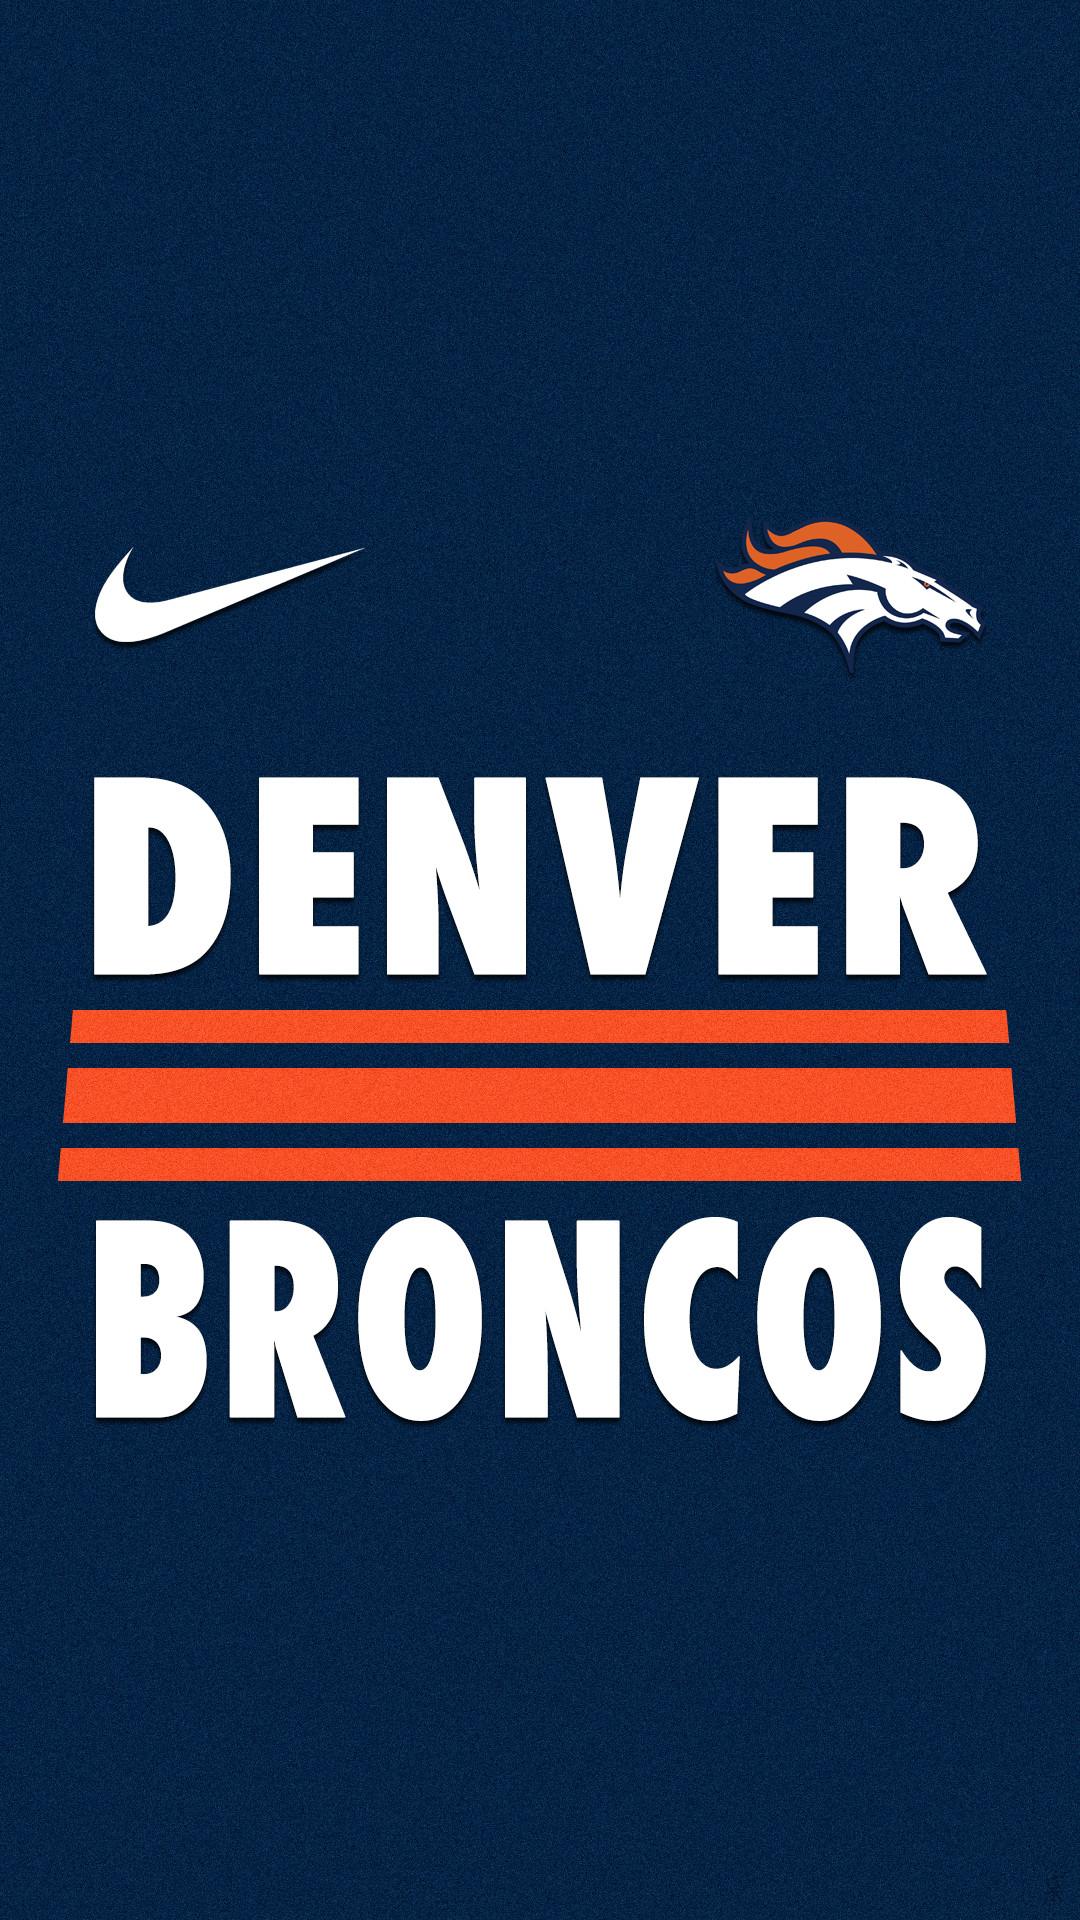 Denver Broncos Wallpaper For Android (image in Collection)